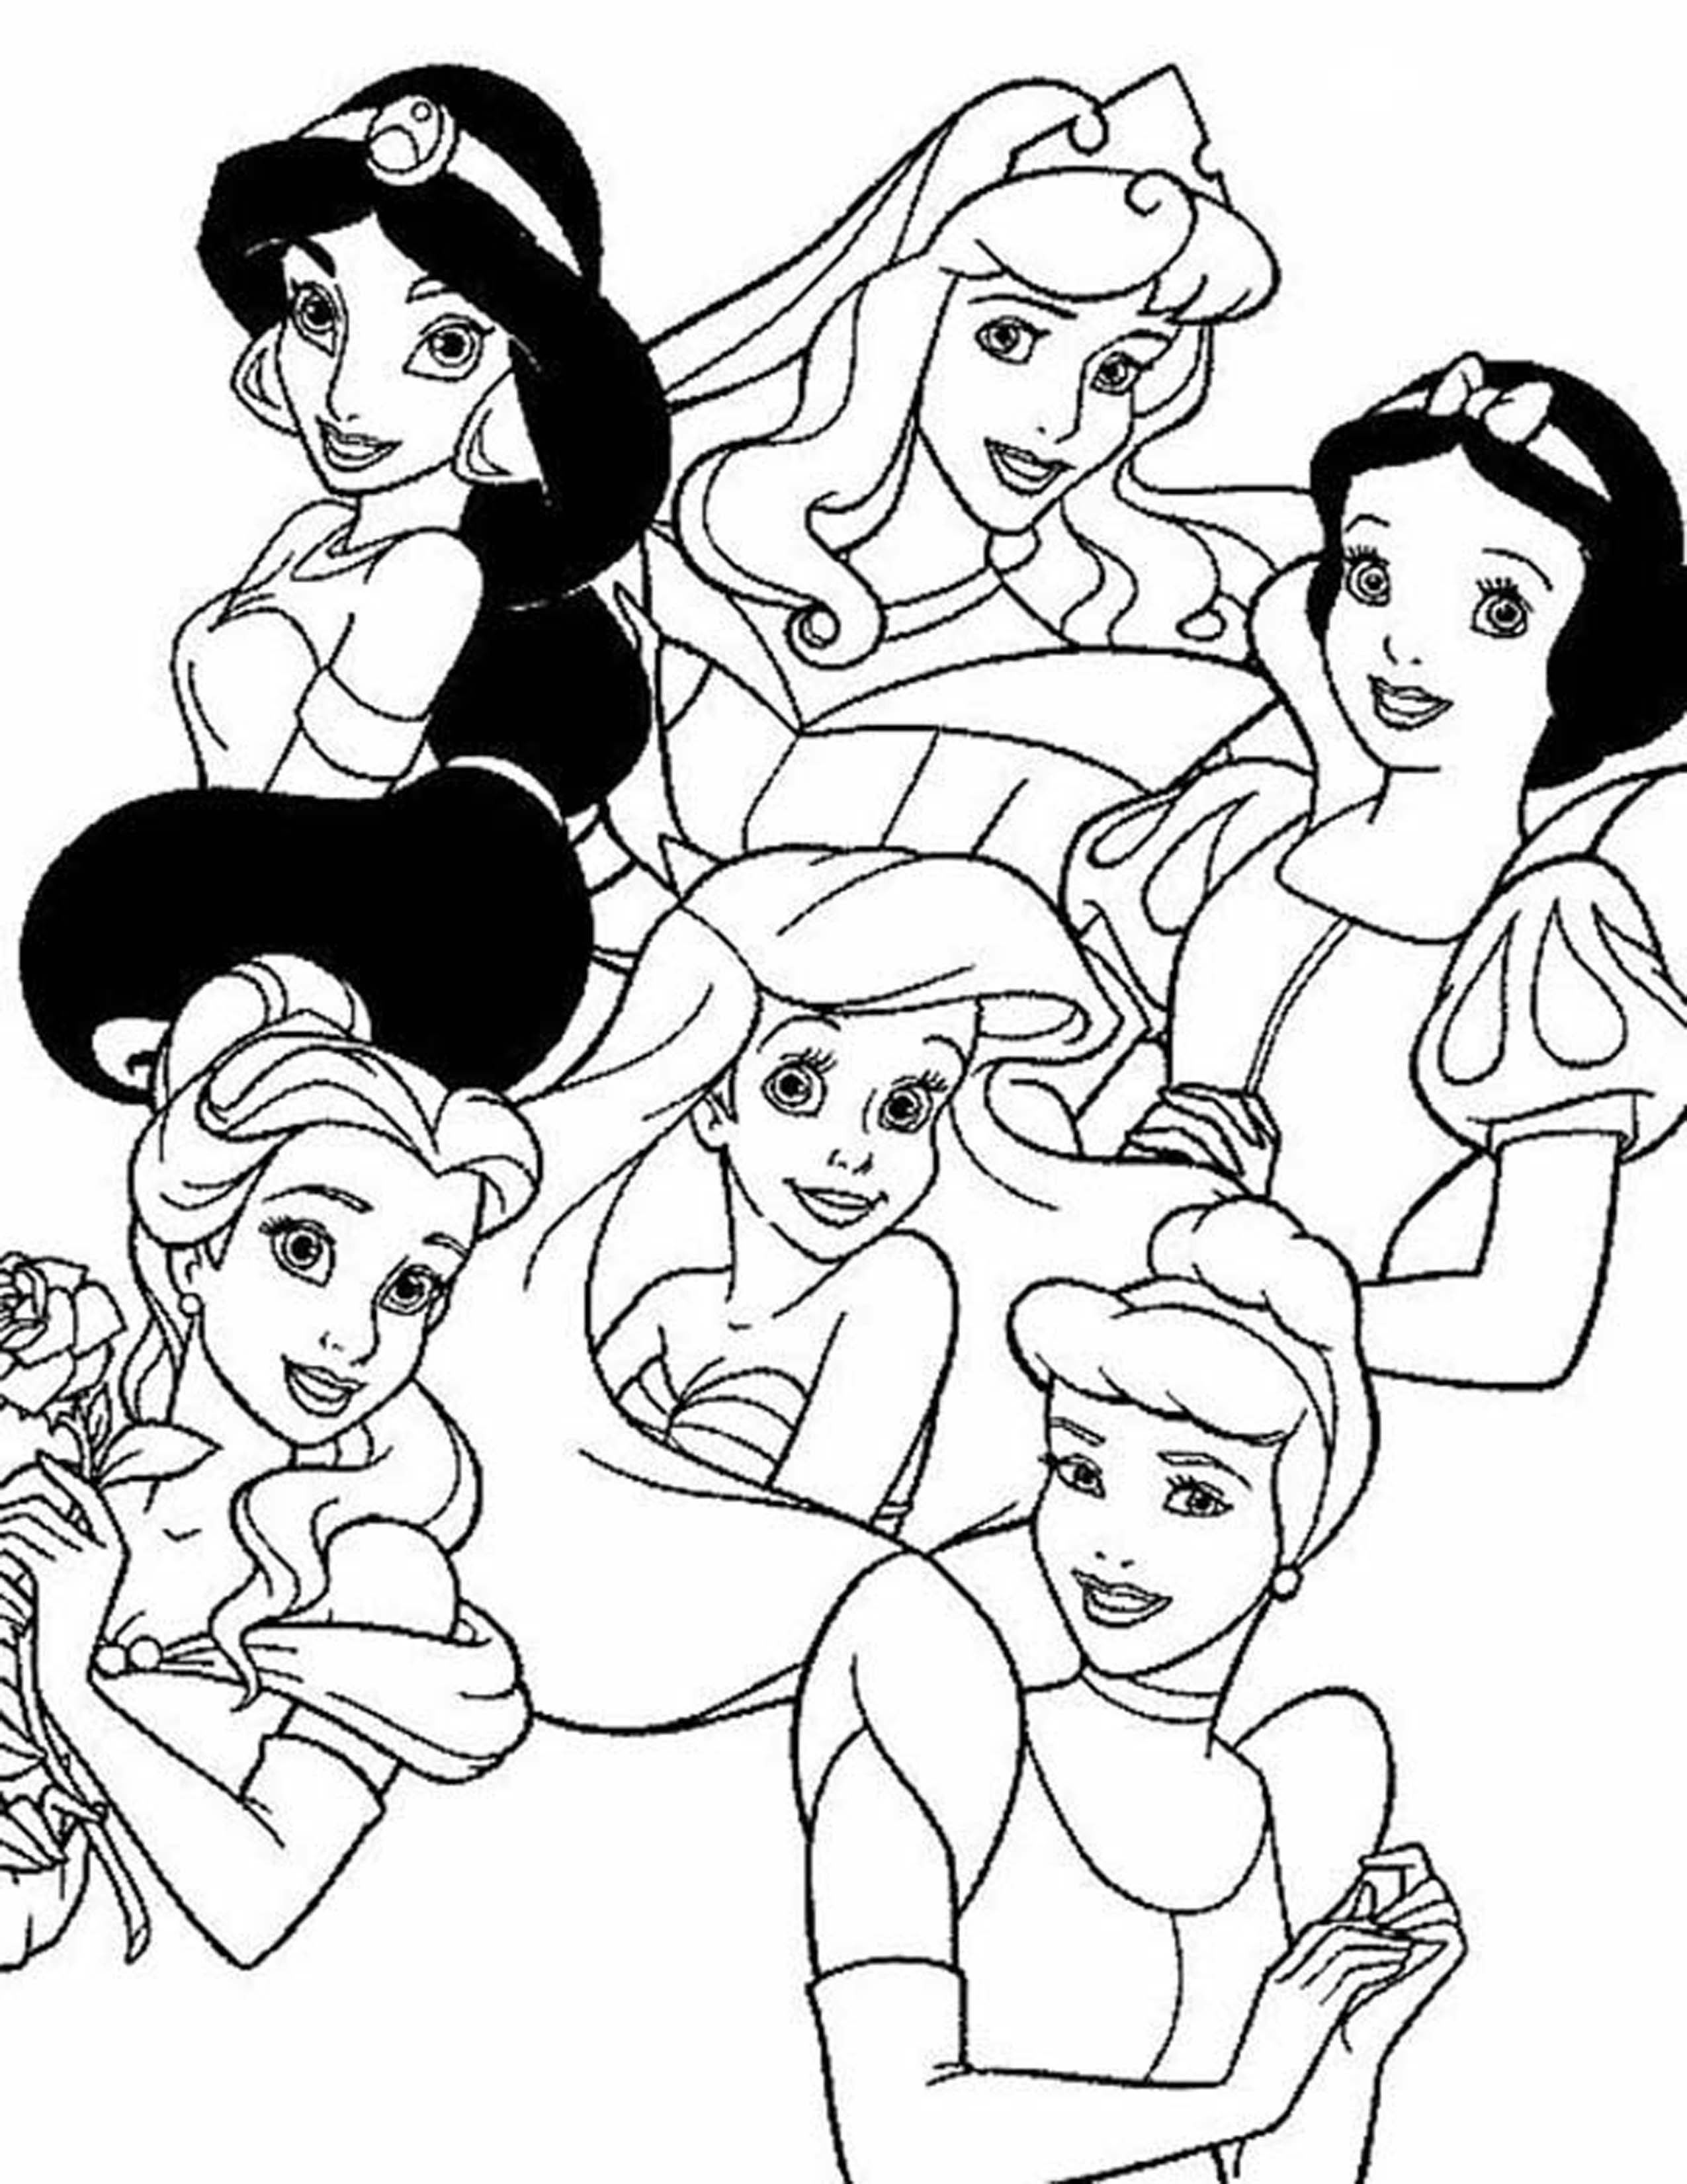 Free Princess Coloring Pages , Download Free Princess Coloring Pages